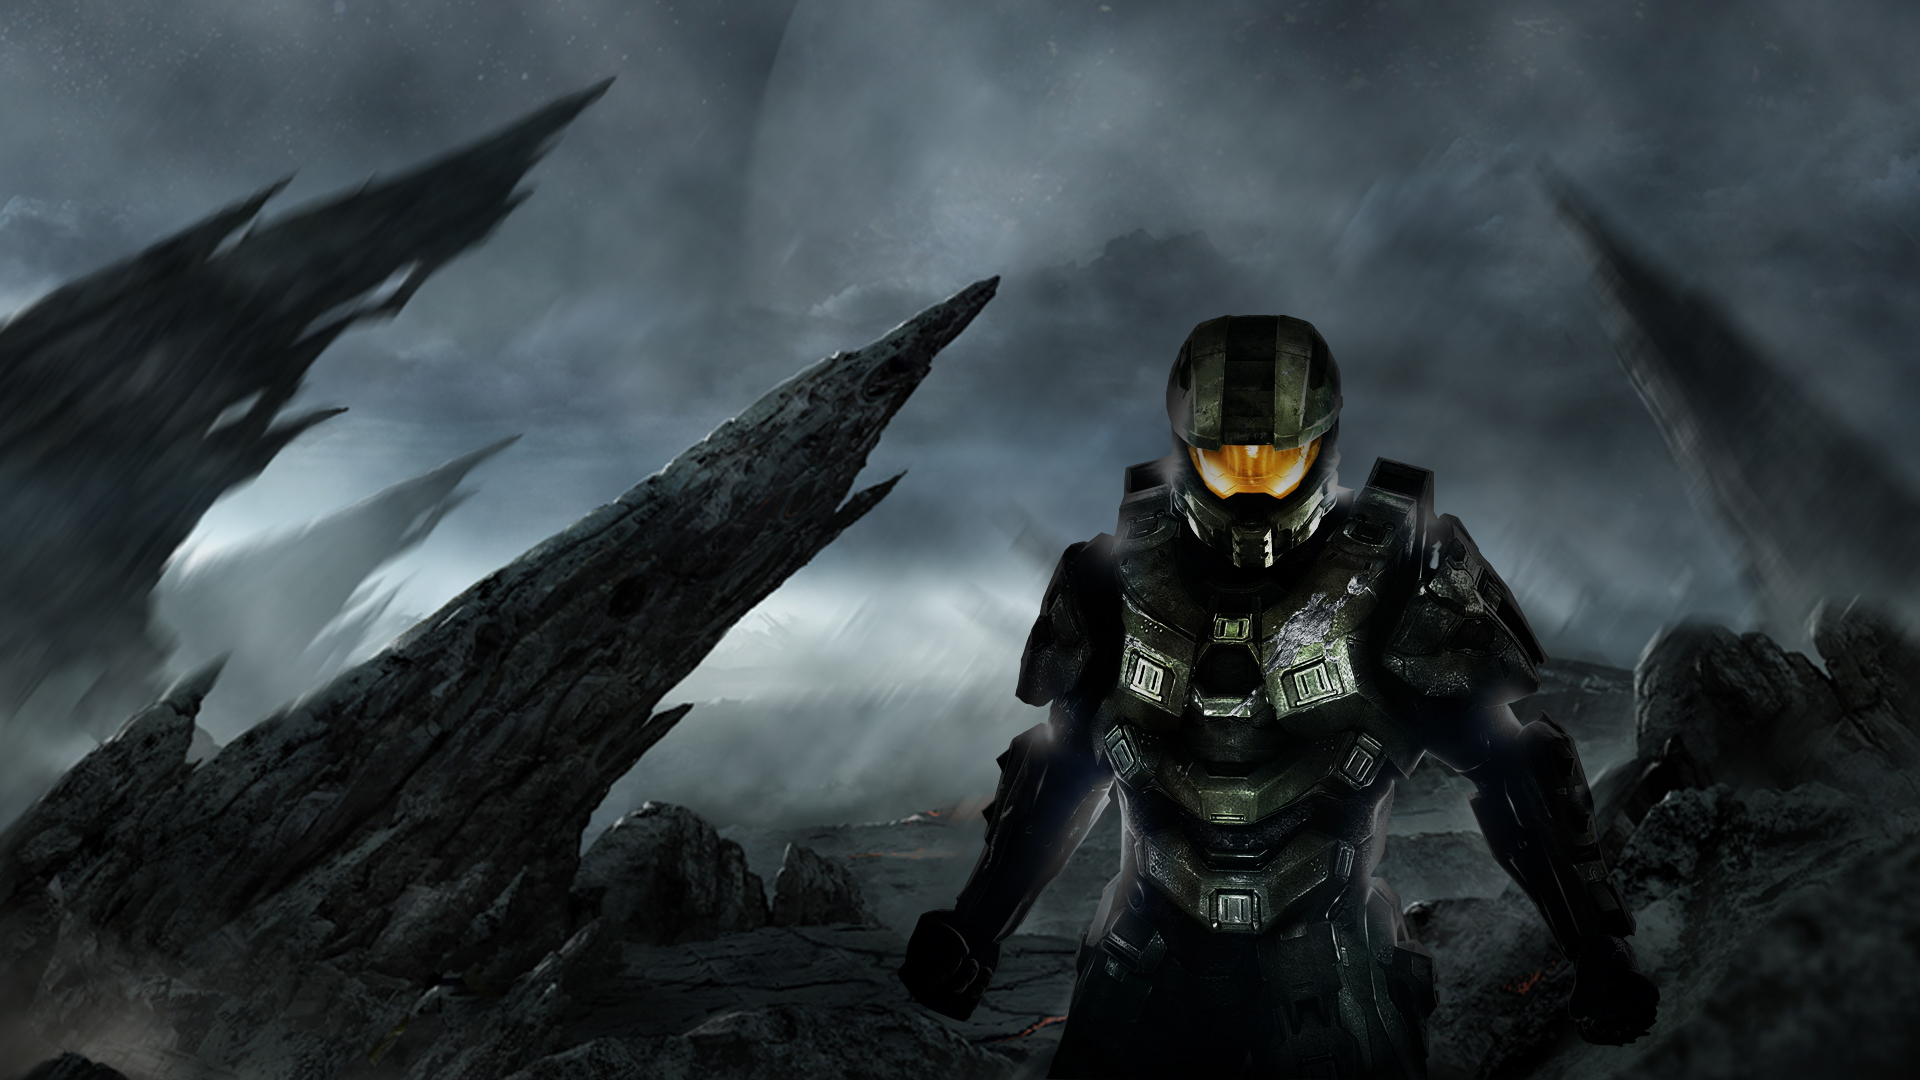 Halo Wallpaper by NIHILUSDESIGNS on